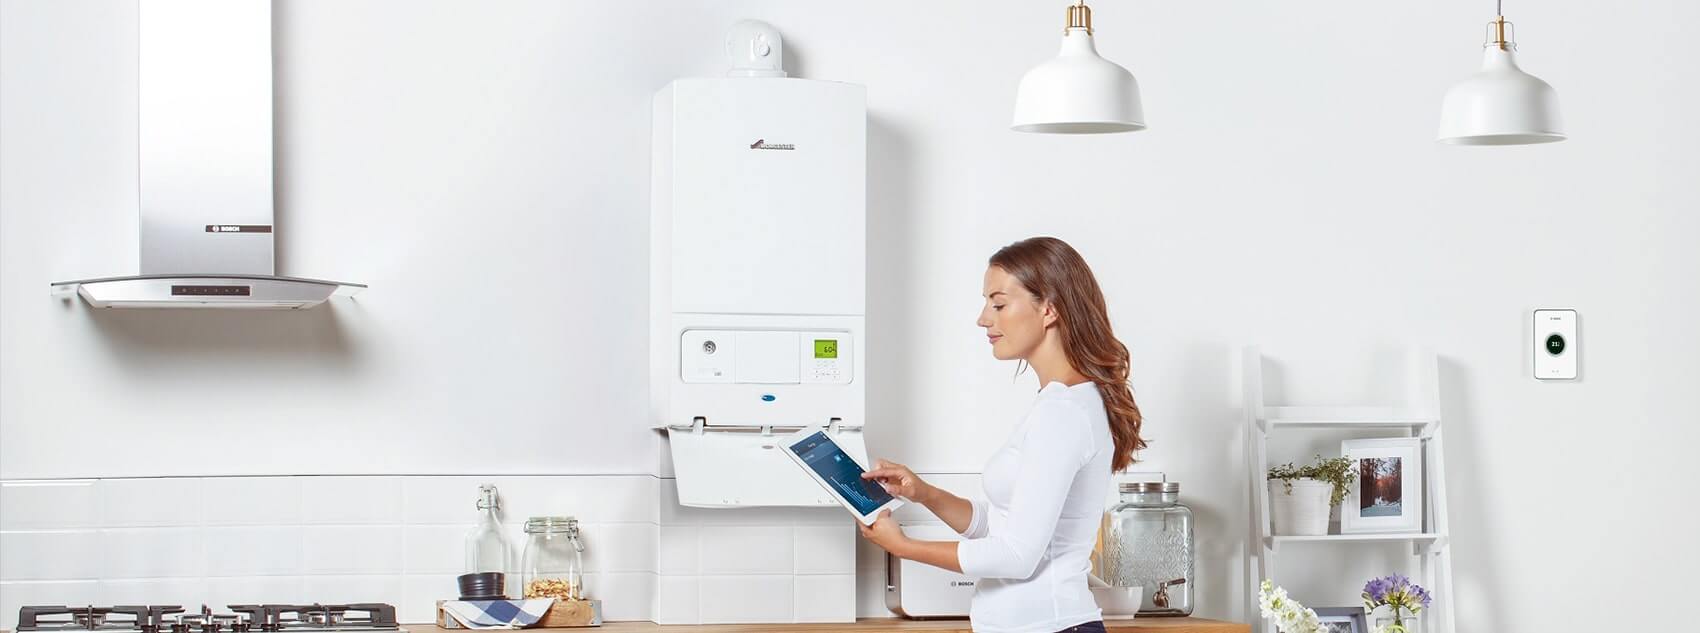 Gas boiler alternatives: Which system should you choose for your home?